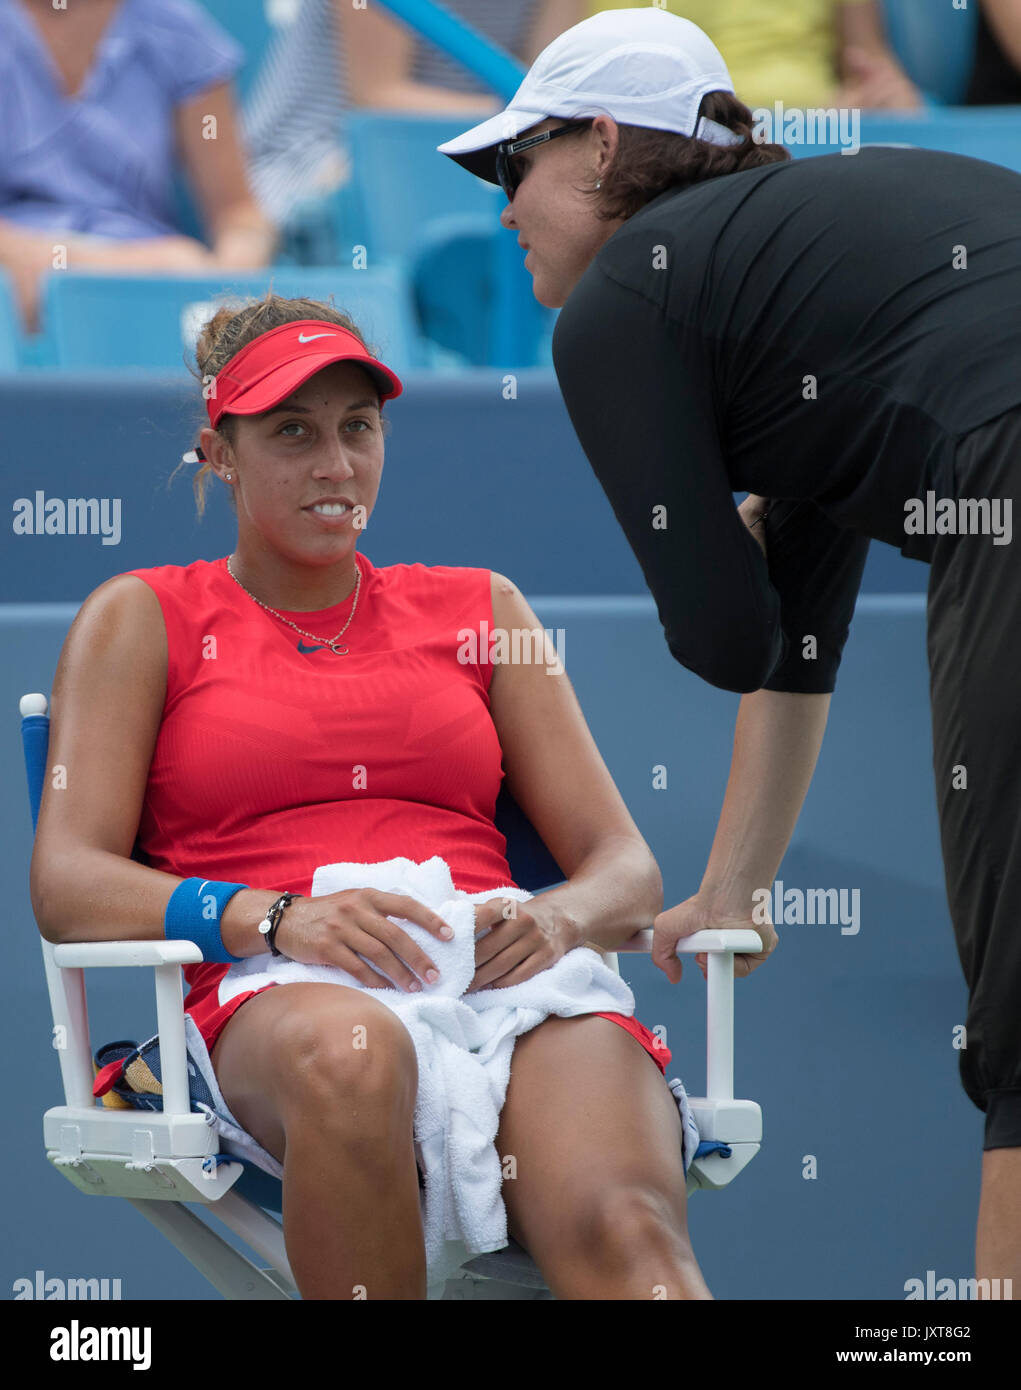 August 17, 2017: Madison Keys (USA) confers with her coach, Lindsay Davenport, as she battles against Garbine Muguruza (ESP) before the rain delay at the Western & Southern Open being played at Lindner Family Tennis Center in Mason, Ohio. © Leslie Billman/Tennisclix/CSM Stock Photo